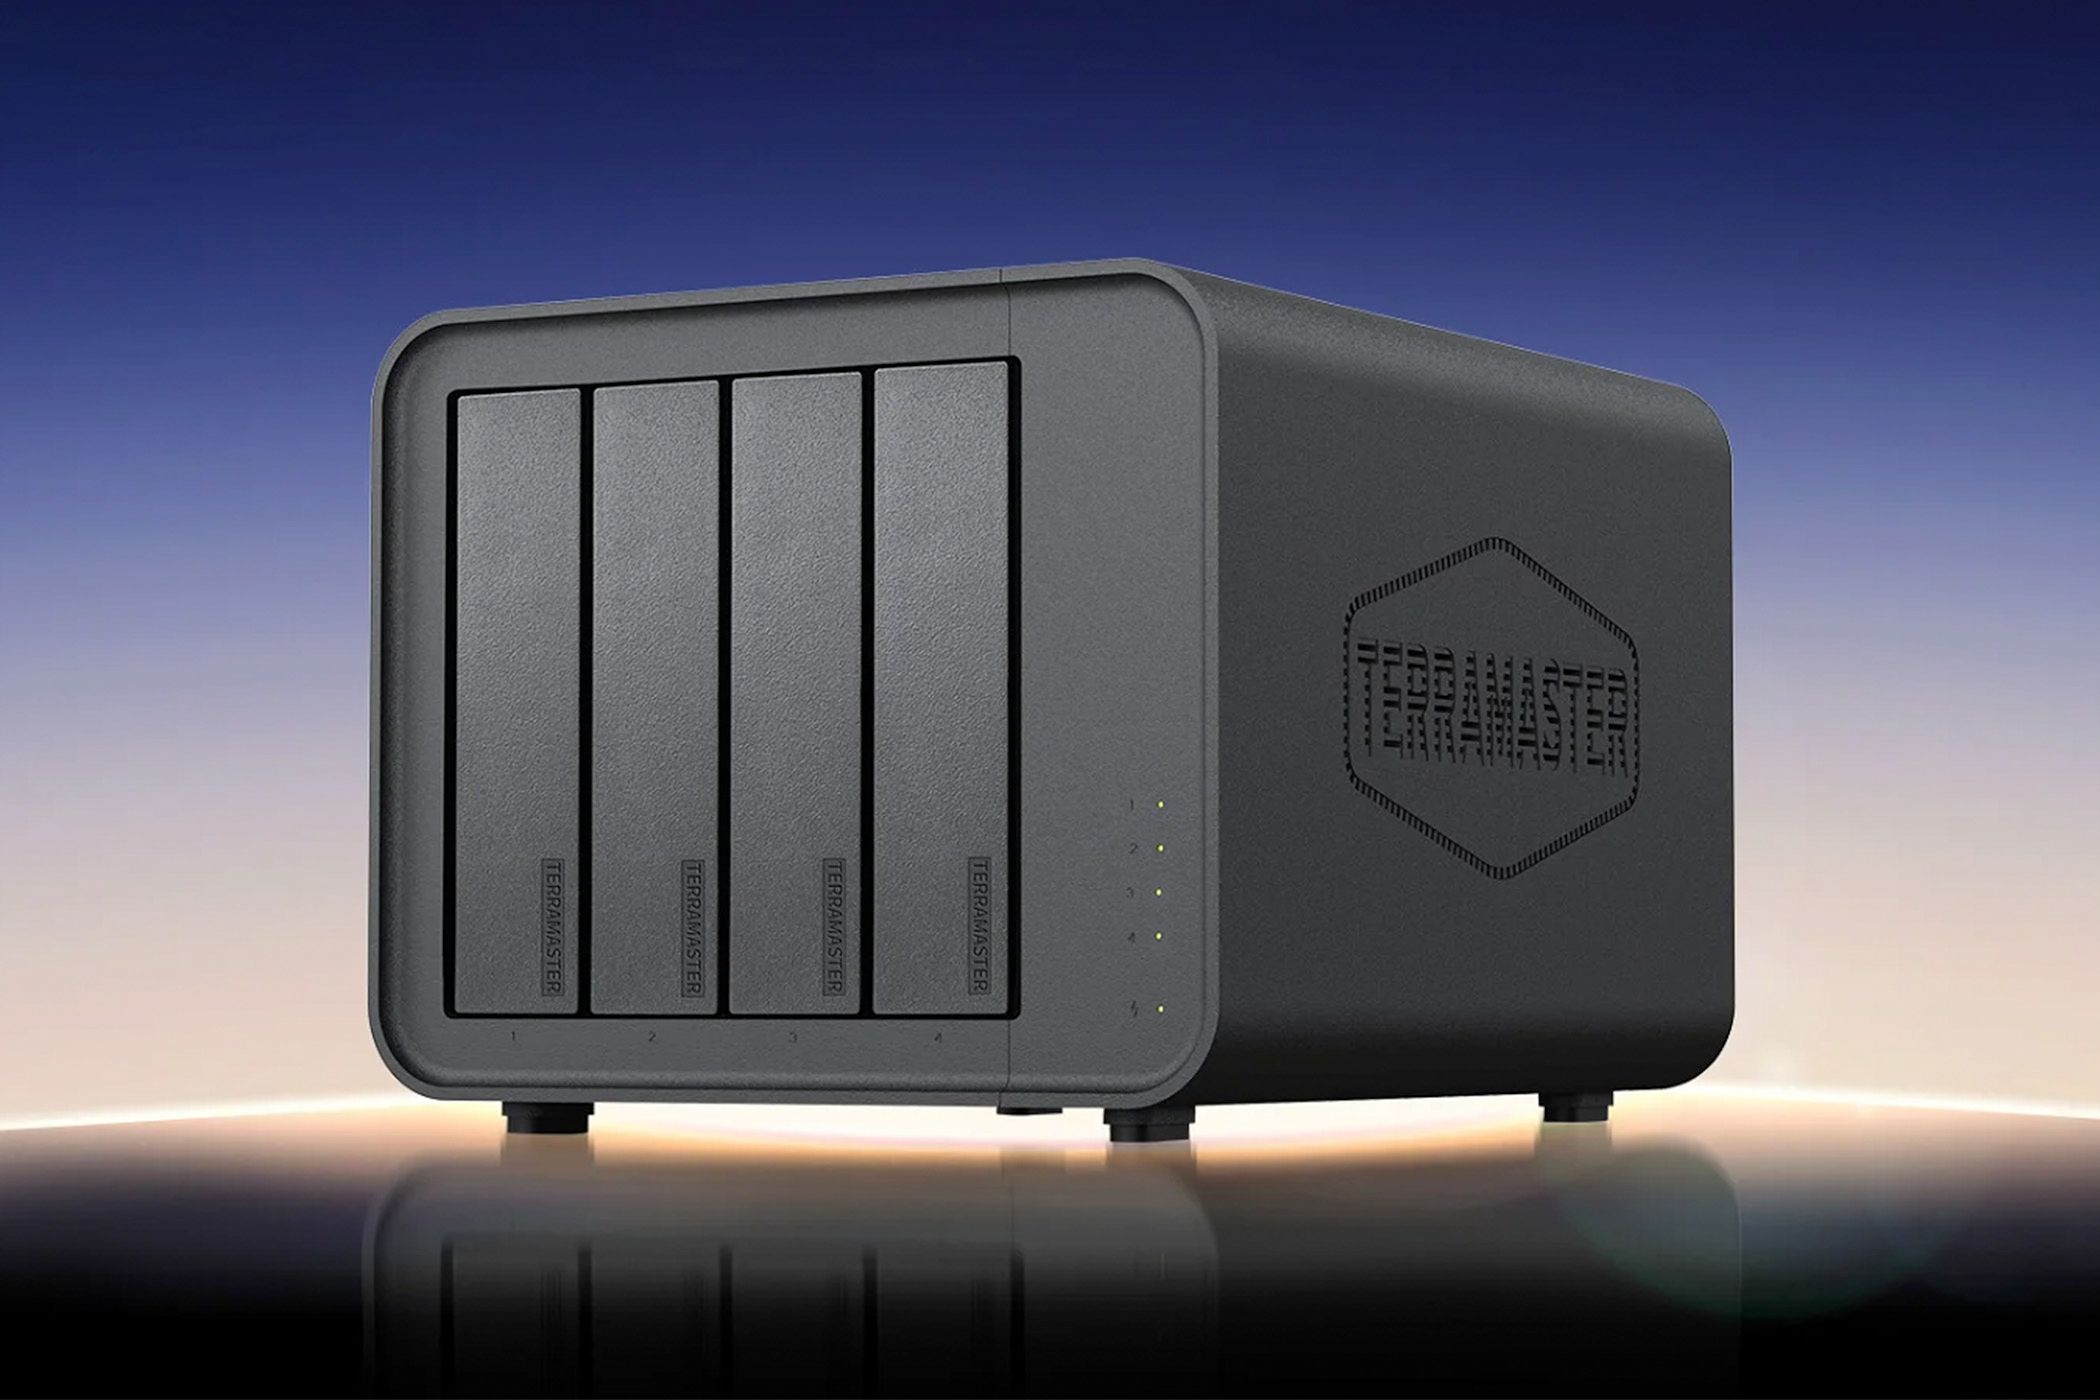 The TerraMaster D8 Hybrid RAID enclosure in front of a sunset.